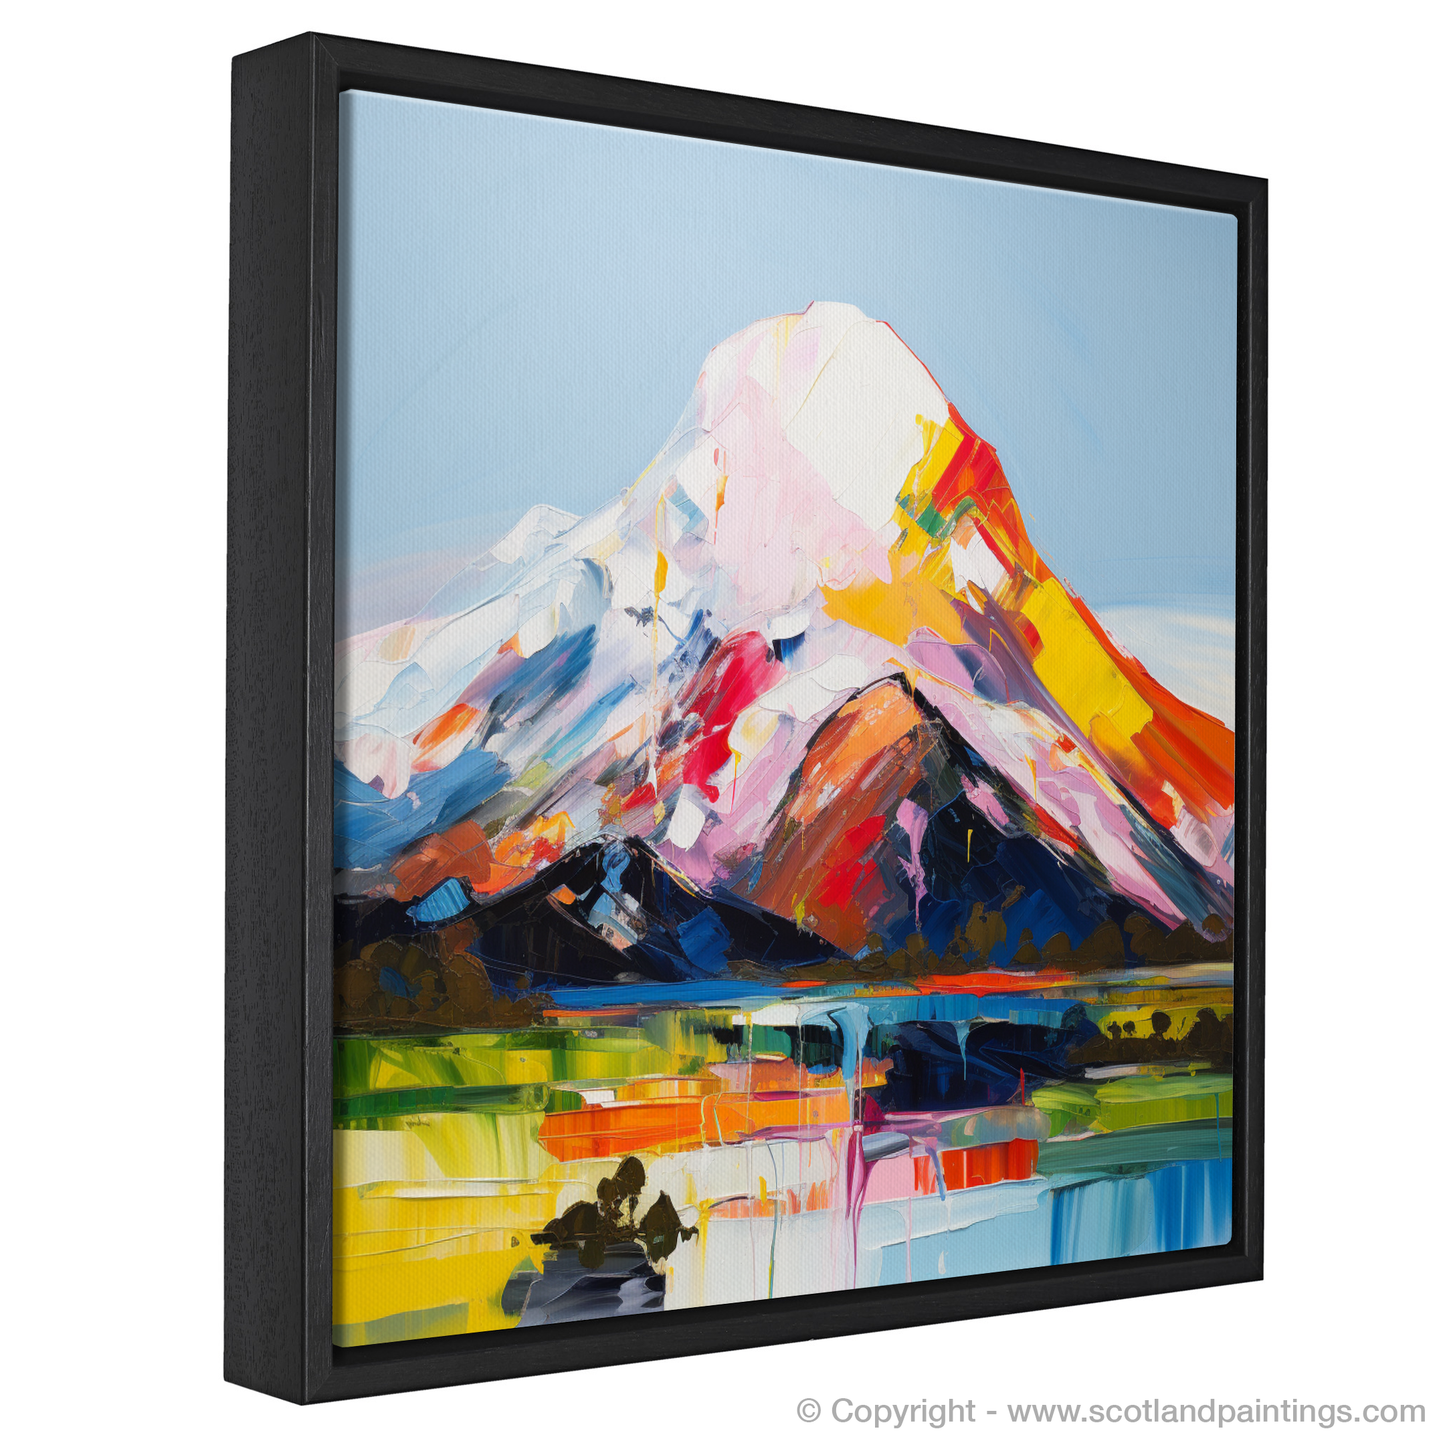 Painting and Art Print of Mount Keen entitled "Sunrise Embrace on Mount Keen".